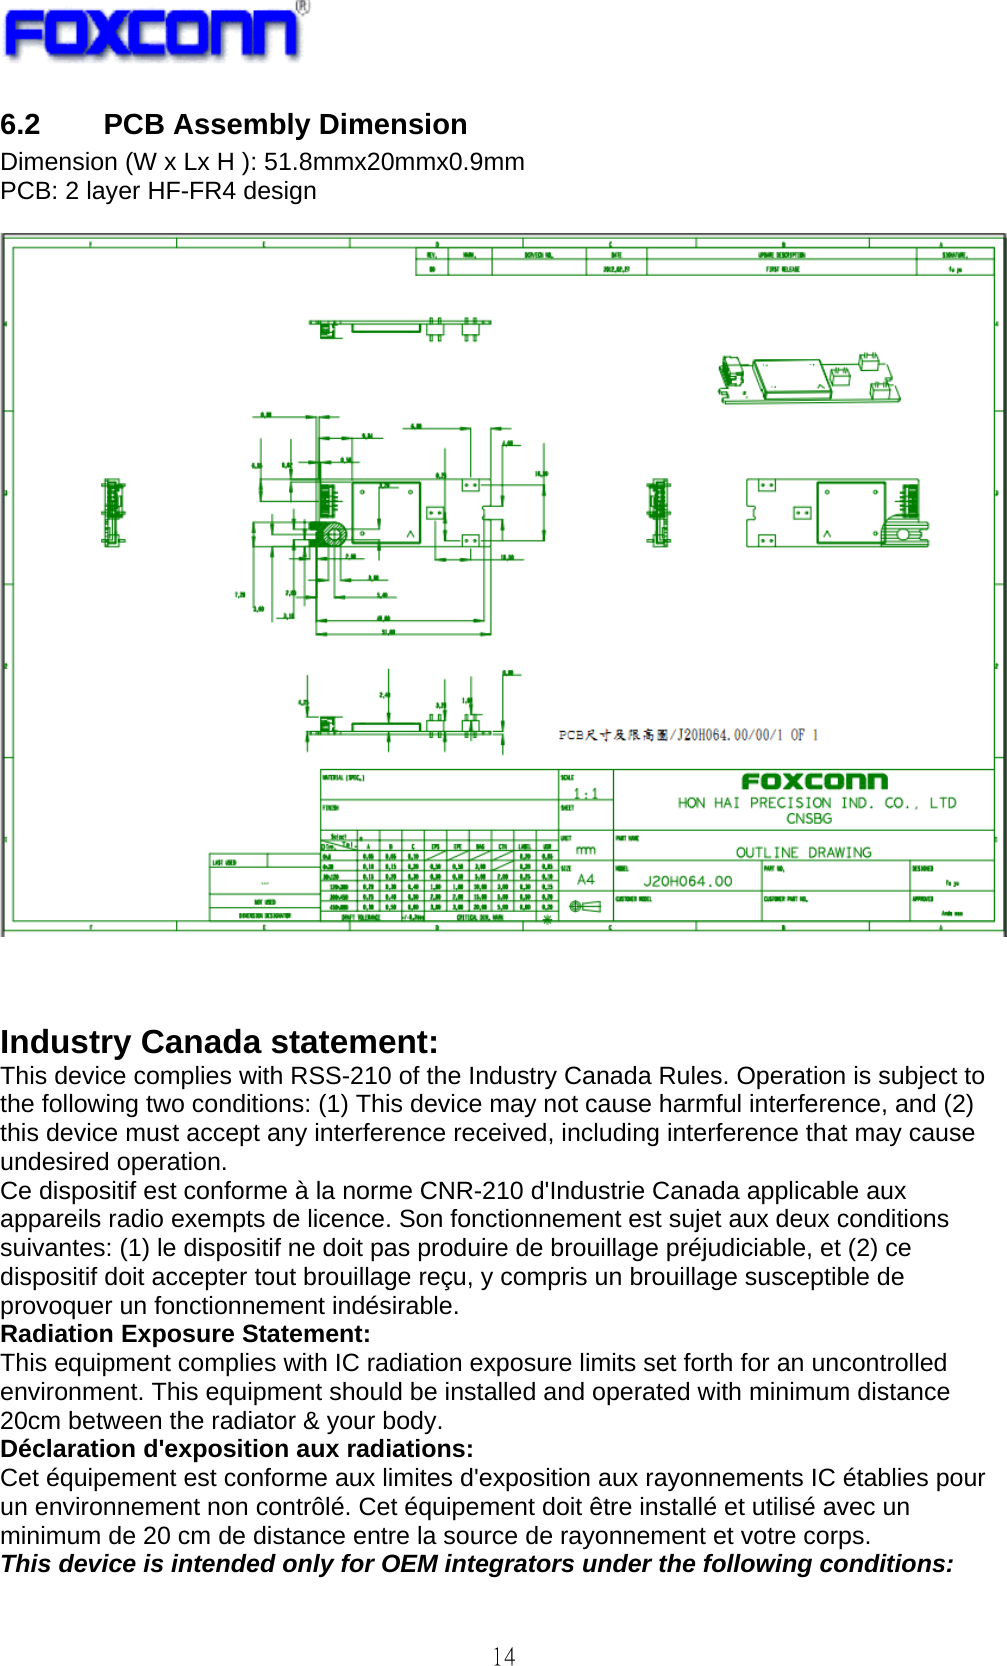   14 6.2 PCB Assembly Dimension Dimension (W x Lx H ): 51.8mmx20mmx0.9mm PCB: 2 layer HF-FR4 design      Industry Canada statement: This device complies with RSS-210 of the Industry Canada Rules. Operation is subject to the following two conditions: (1) This device may not cause harmful interference, and (2) this device must accept any interference received, including interference that may cause undesired operation. Ce dispositif est conforme à la norme CNR-210 d&apos;Industrie Canada applicable aux appareils radio exempts de licence. Son fonctionnement est sujet aux deux conditions suivantes: (1) le dispositif ne doit pas produire de brouillage préjudiciable, et (2) ce dispositif doit accepter tout brouillage reçu, y compris un brouillage susceptible de provoquer un fonctionnement indésirable. Radiation Exposure Statement: This equipment complies with IC radiation exposure limits set forth for an uncontrolled environment. This equipment should be installed and operated with minimum distance 20cm between the radiator &amp; your body. Déclaration d&apos;exposition aux radiations: Cet équipement est conforme aux limites d&apos;exposition aux rayonnements IC établies pour un environnement non contrôlé. Cet équipement doit être installé et utilisé avec un minimum de 20 cm de distance entre la source de rayonnement et votre corps. This device is intended only for OEM integrators under the following conditions: 